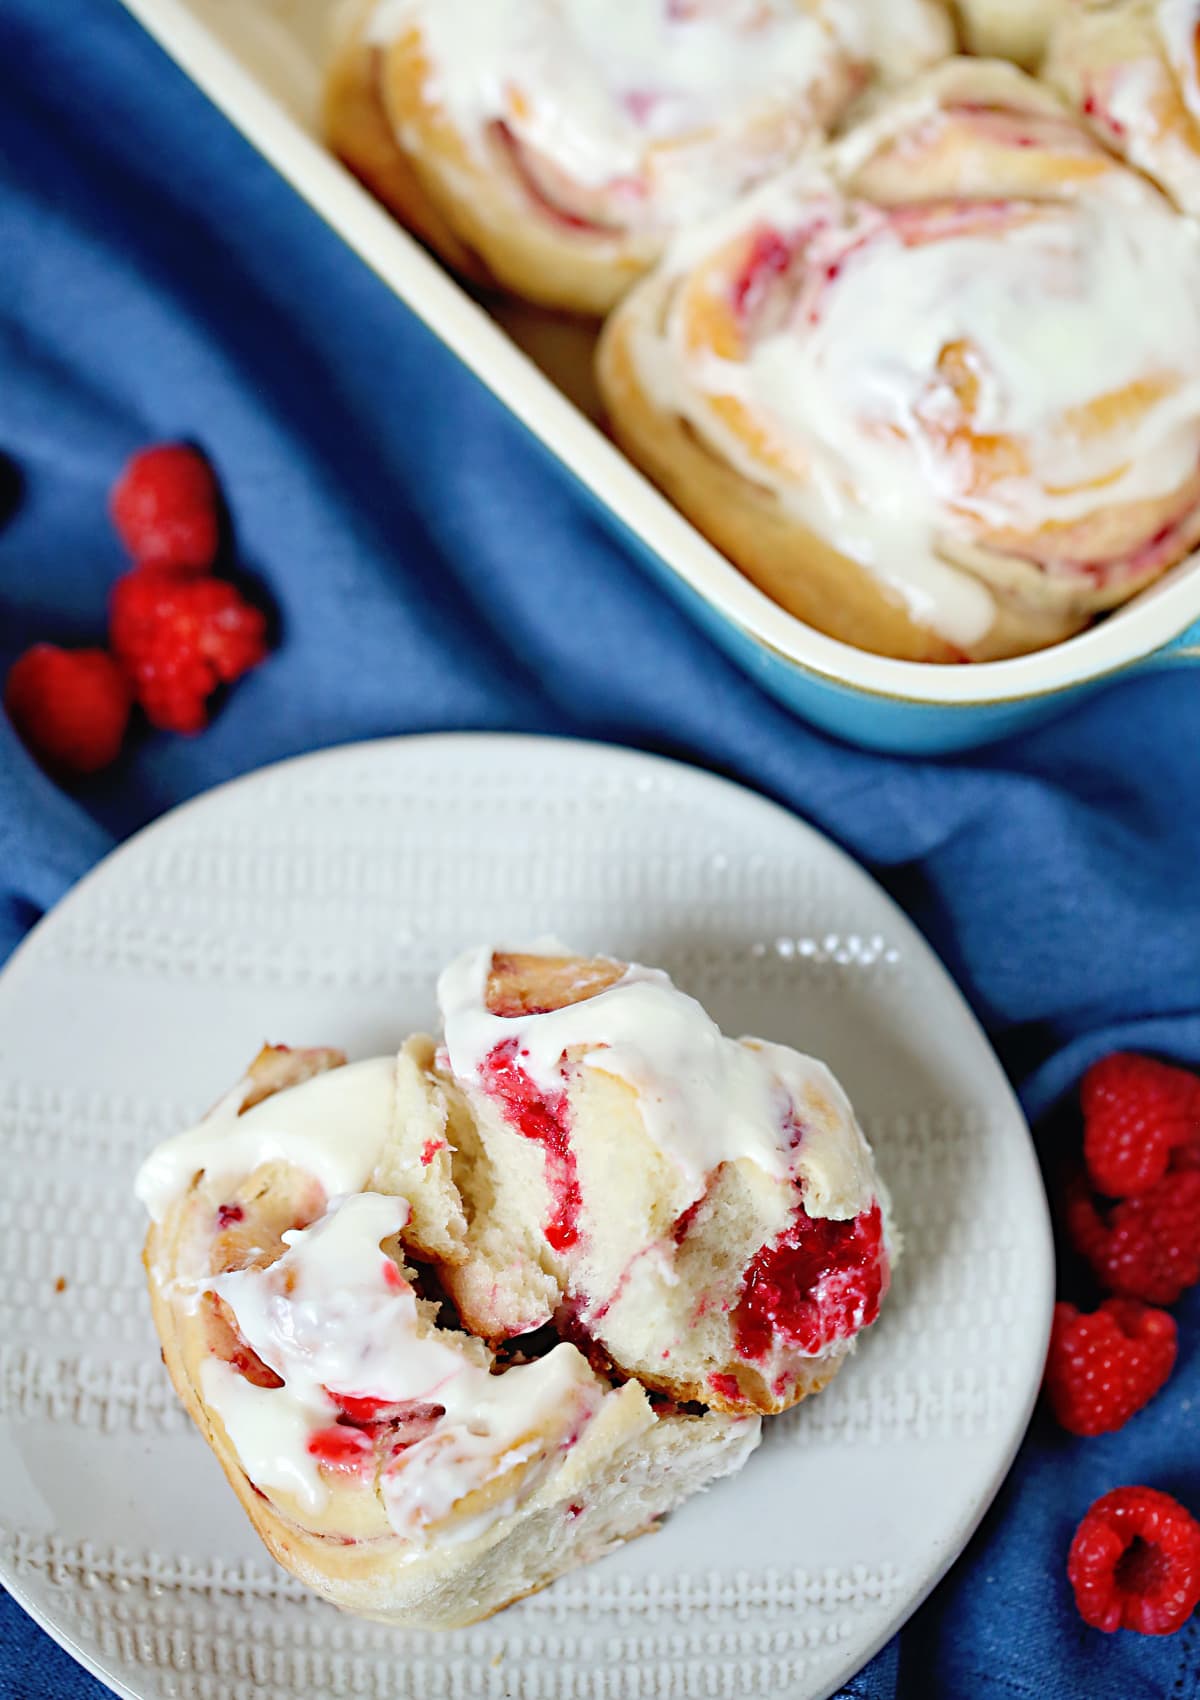 Raspberry Sweet Rolls with Cream Cheese Icing - Sally's Baking Addiction